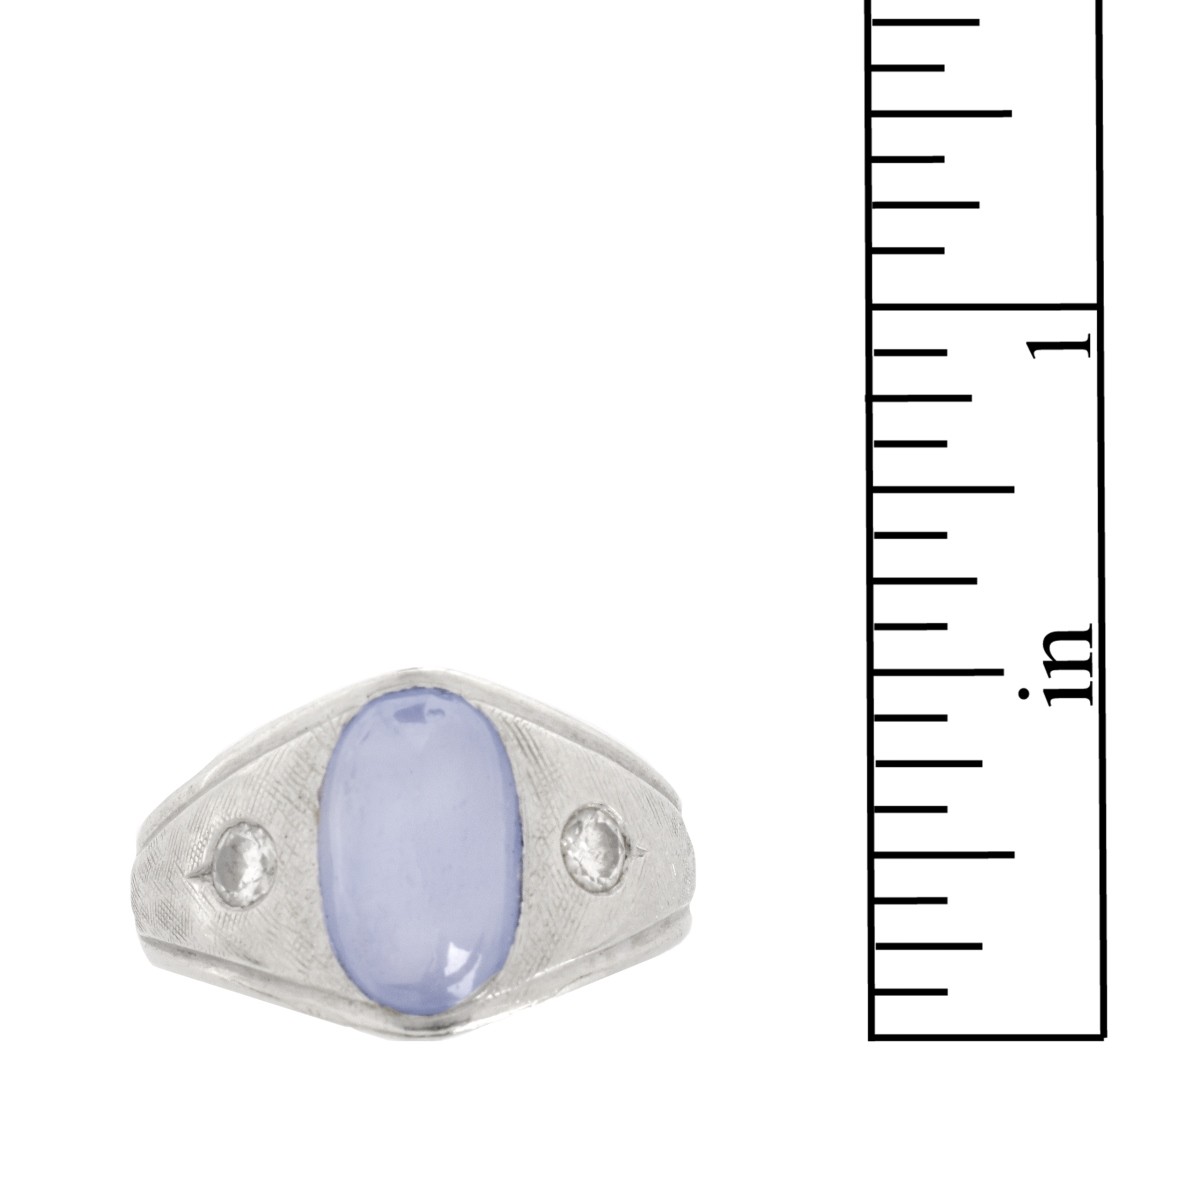 Star Sapphire and 14K Ring